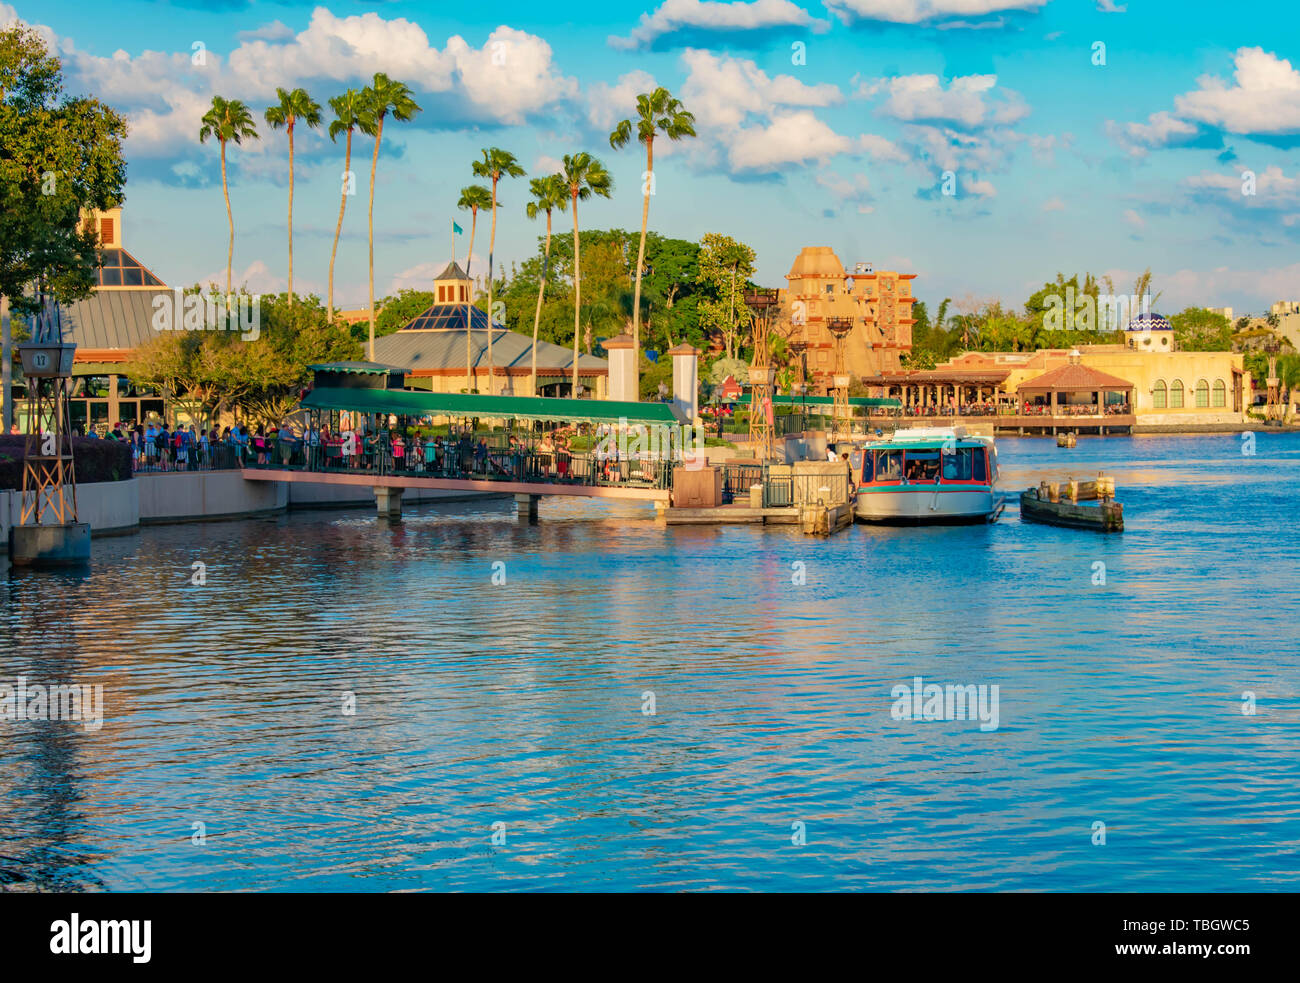 Orlando, Florida . March 27, 2019. People boarding taxi boat on dock and panoramic view of Italy Pavilion at Epcot in Walt Disney World . Stock Photo